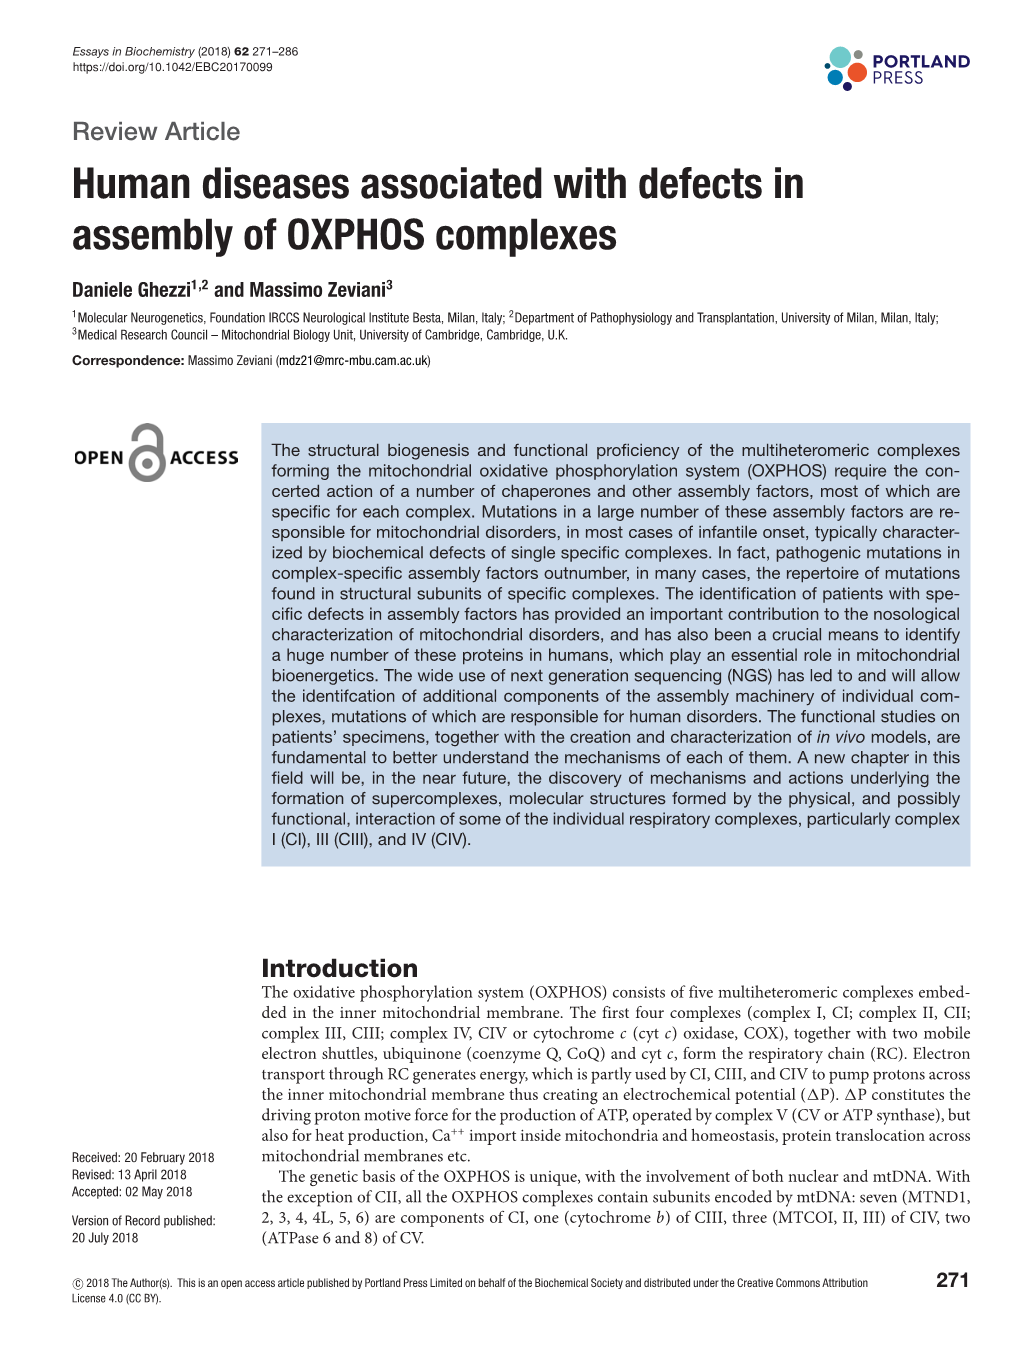 Human Diseases Associated with Defects in Assembly of OXPHOS Complexes